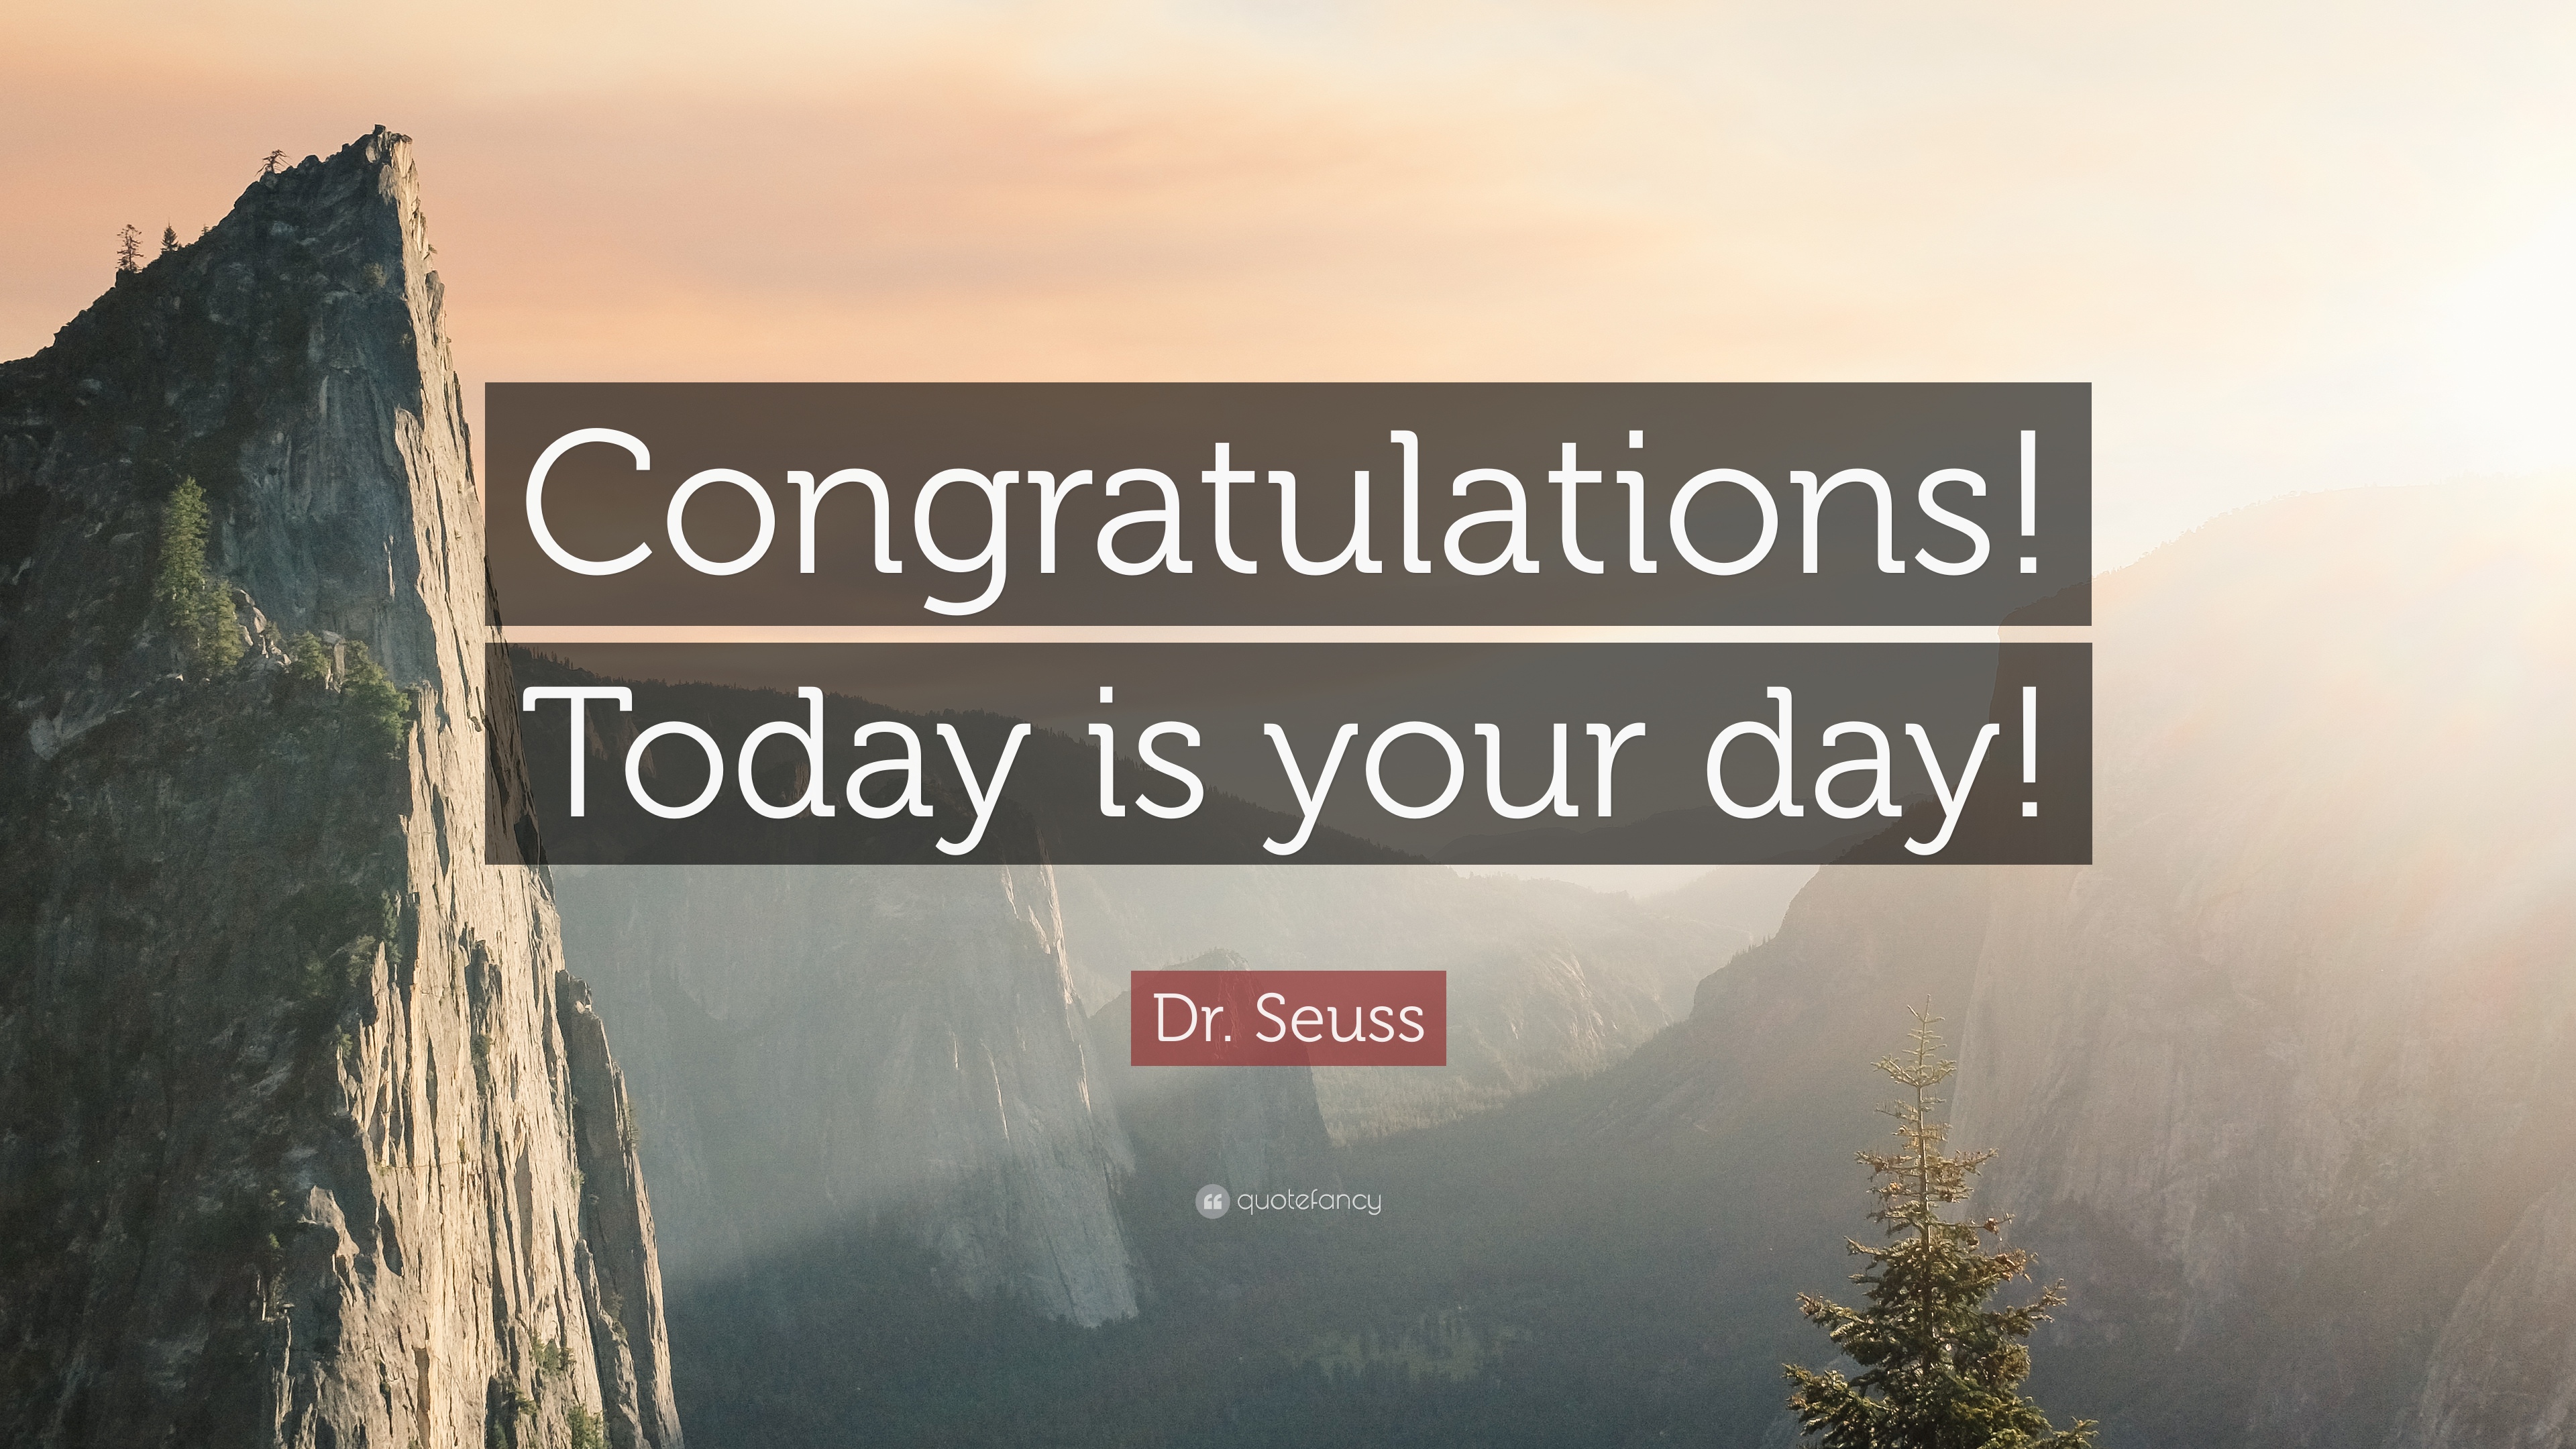 Dr. Seuss Quote: “Congratulations! Today is your day!” 12